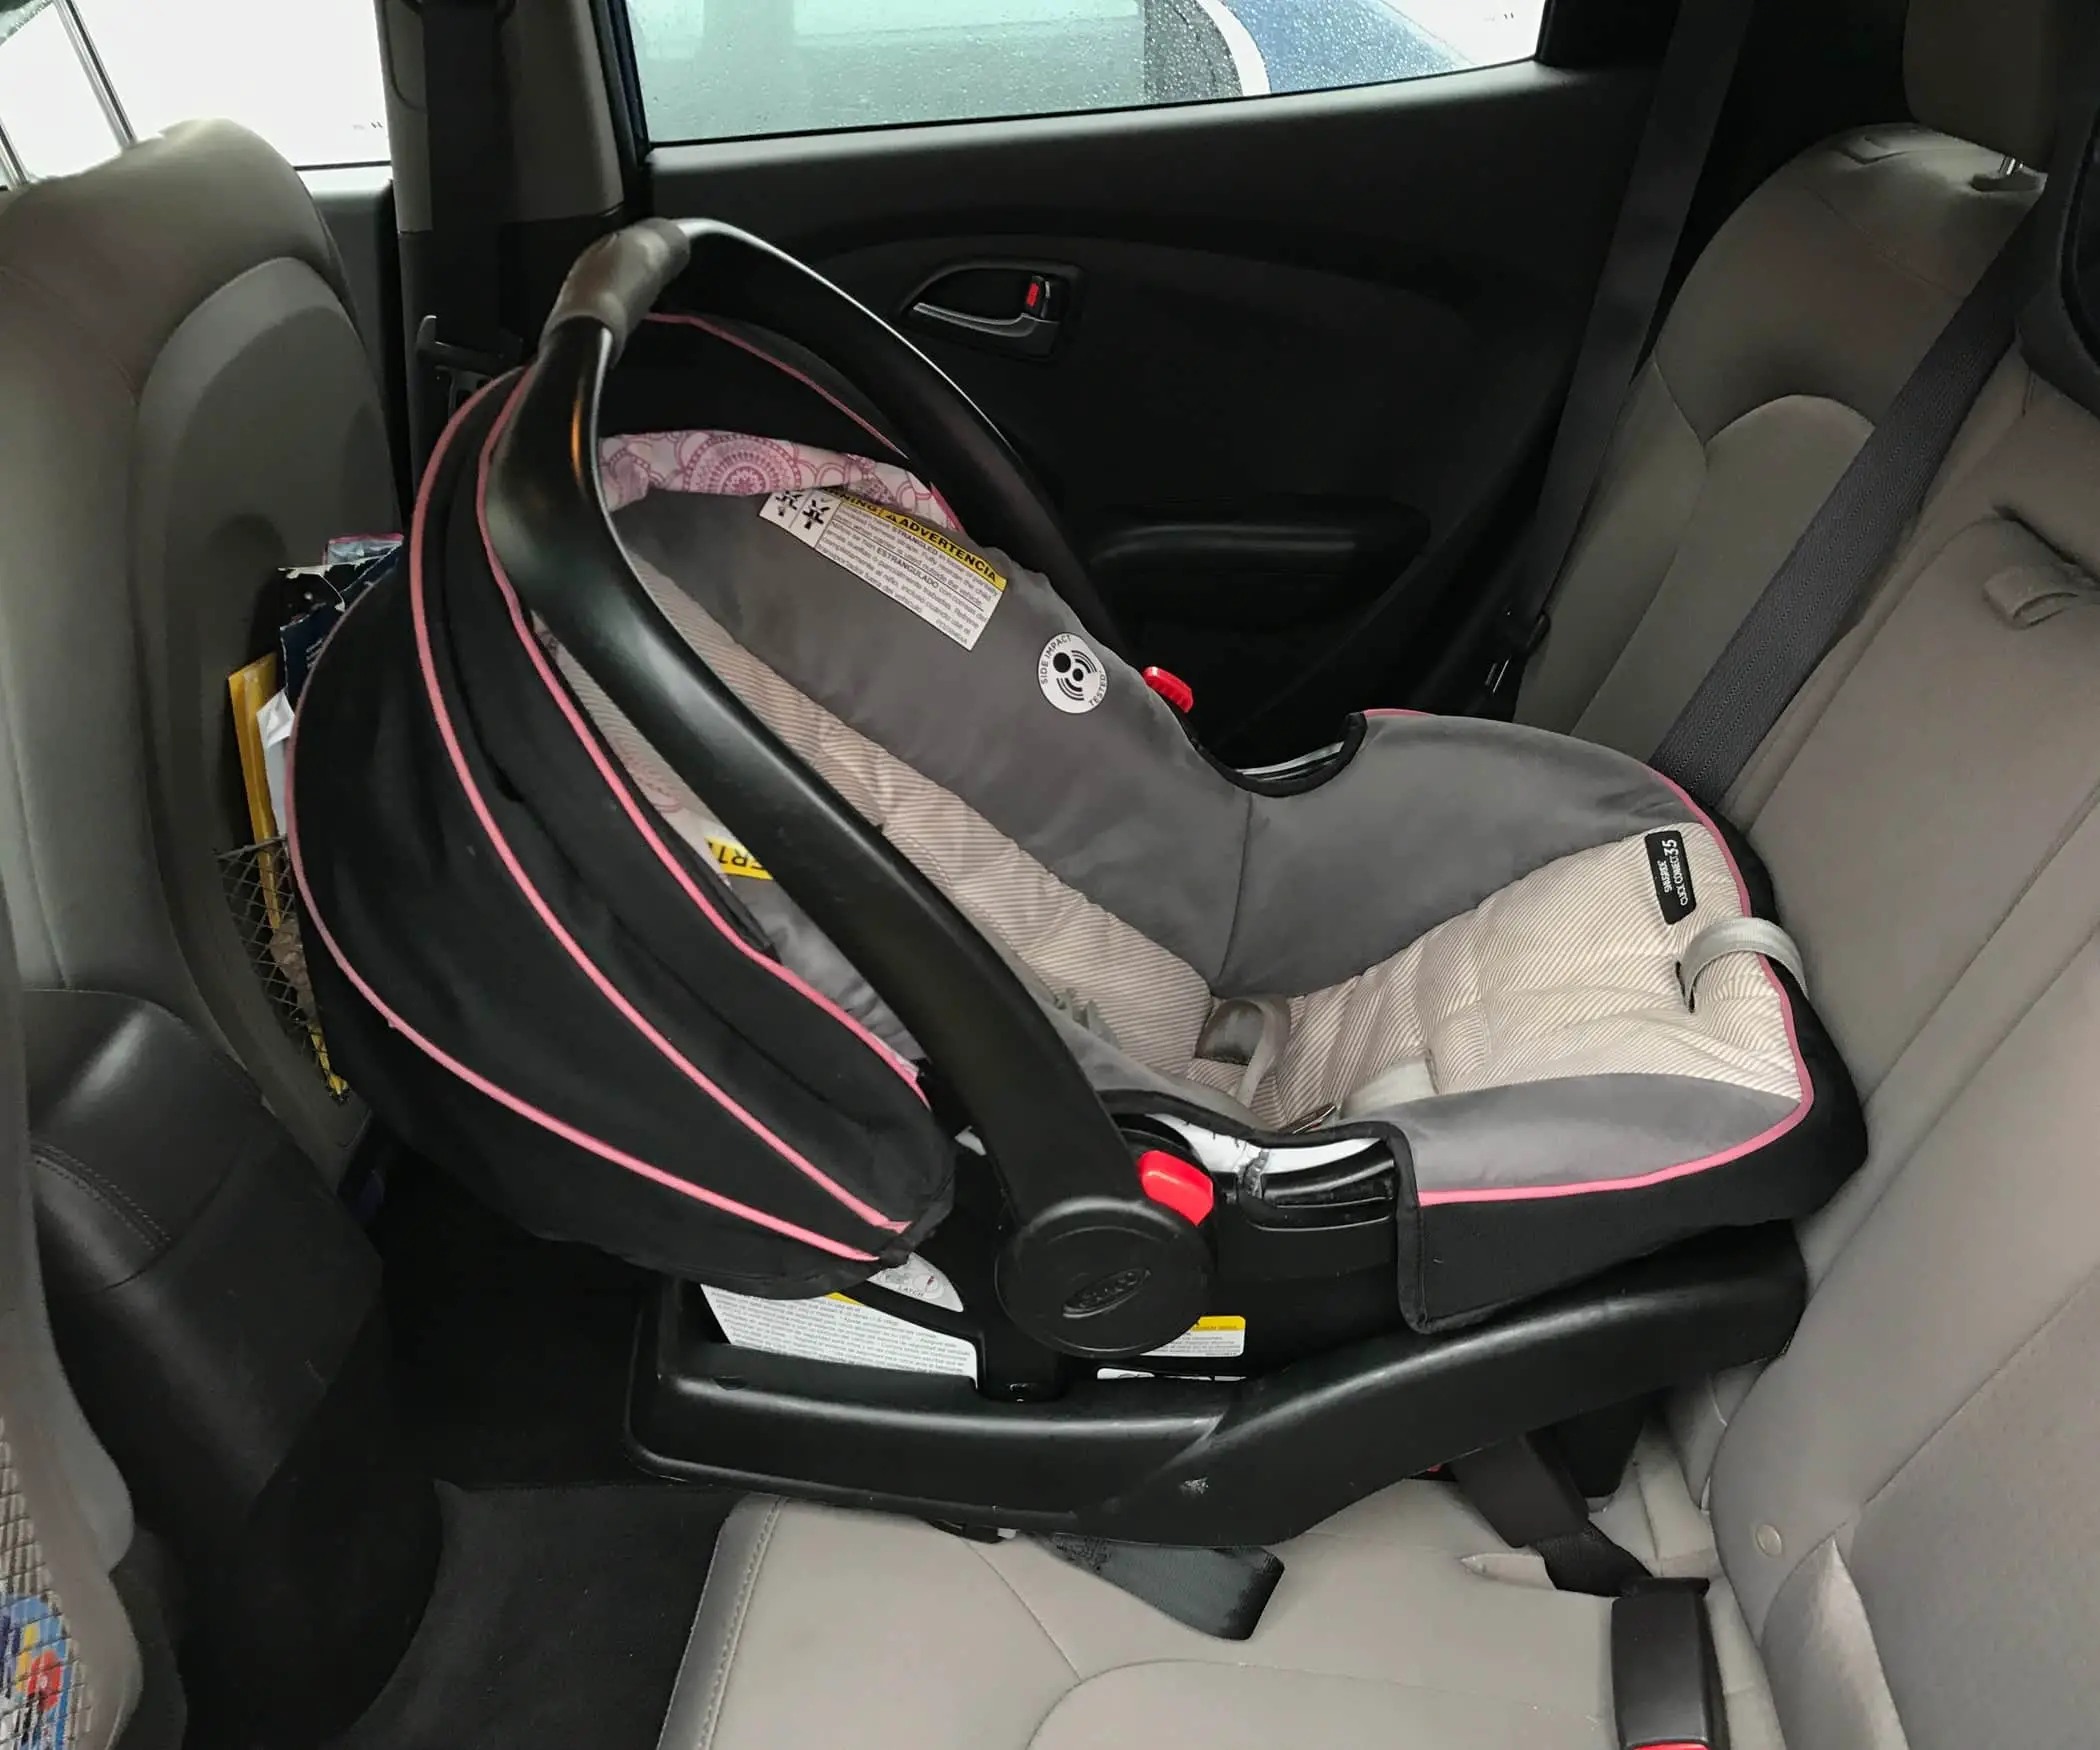 How to Properly Install an Infant Car Seat : 8 Steps (with Pictures ...